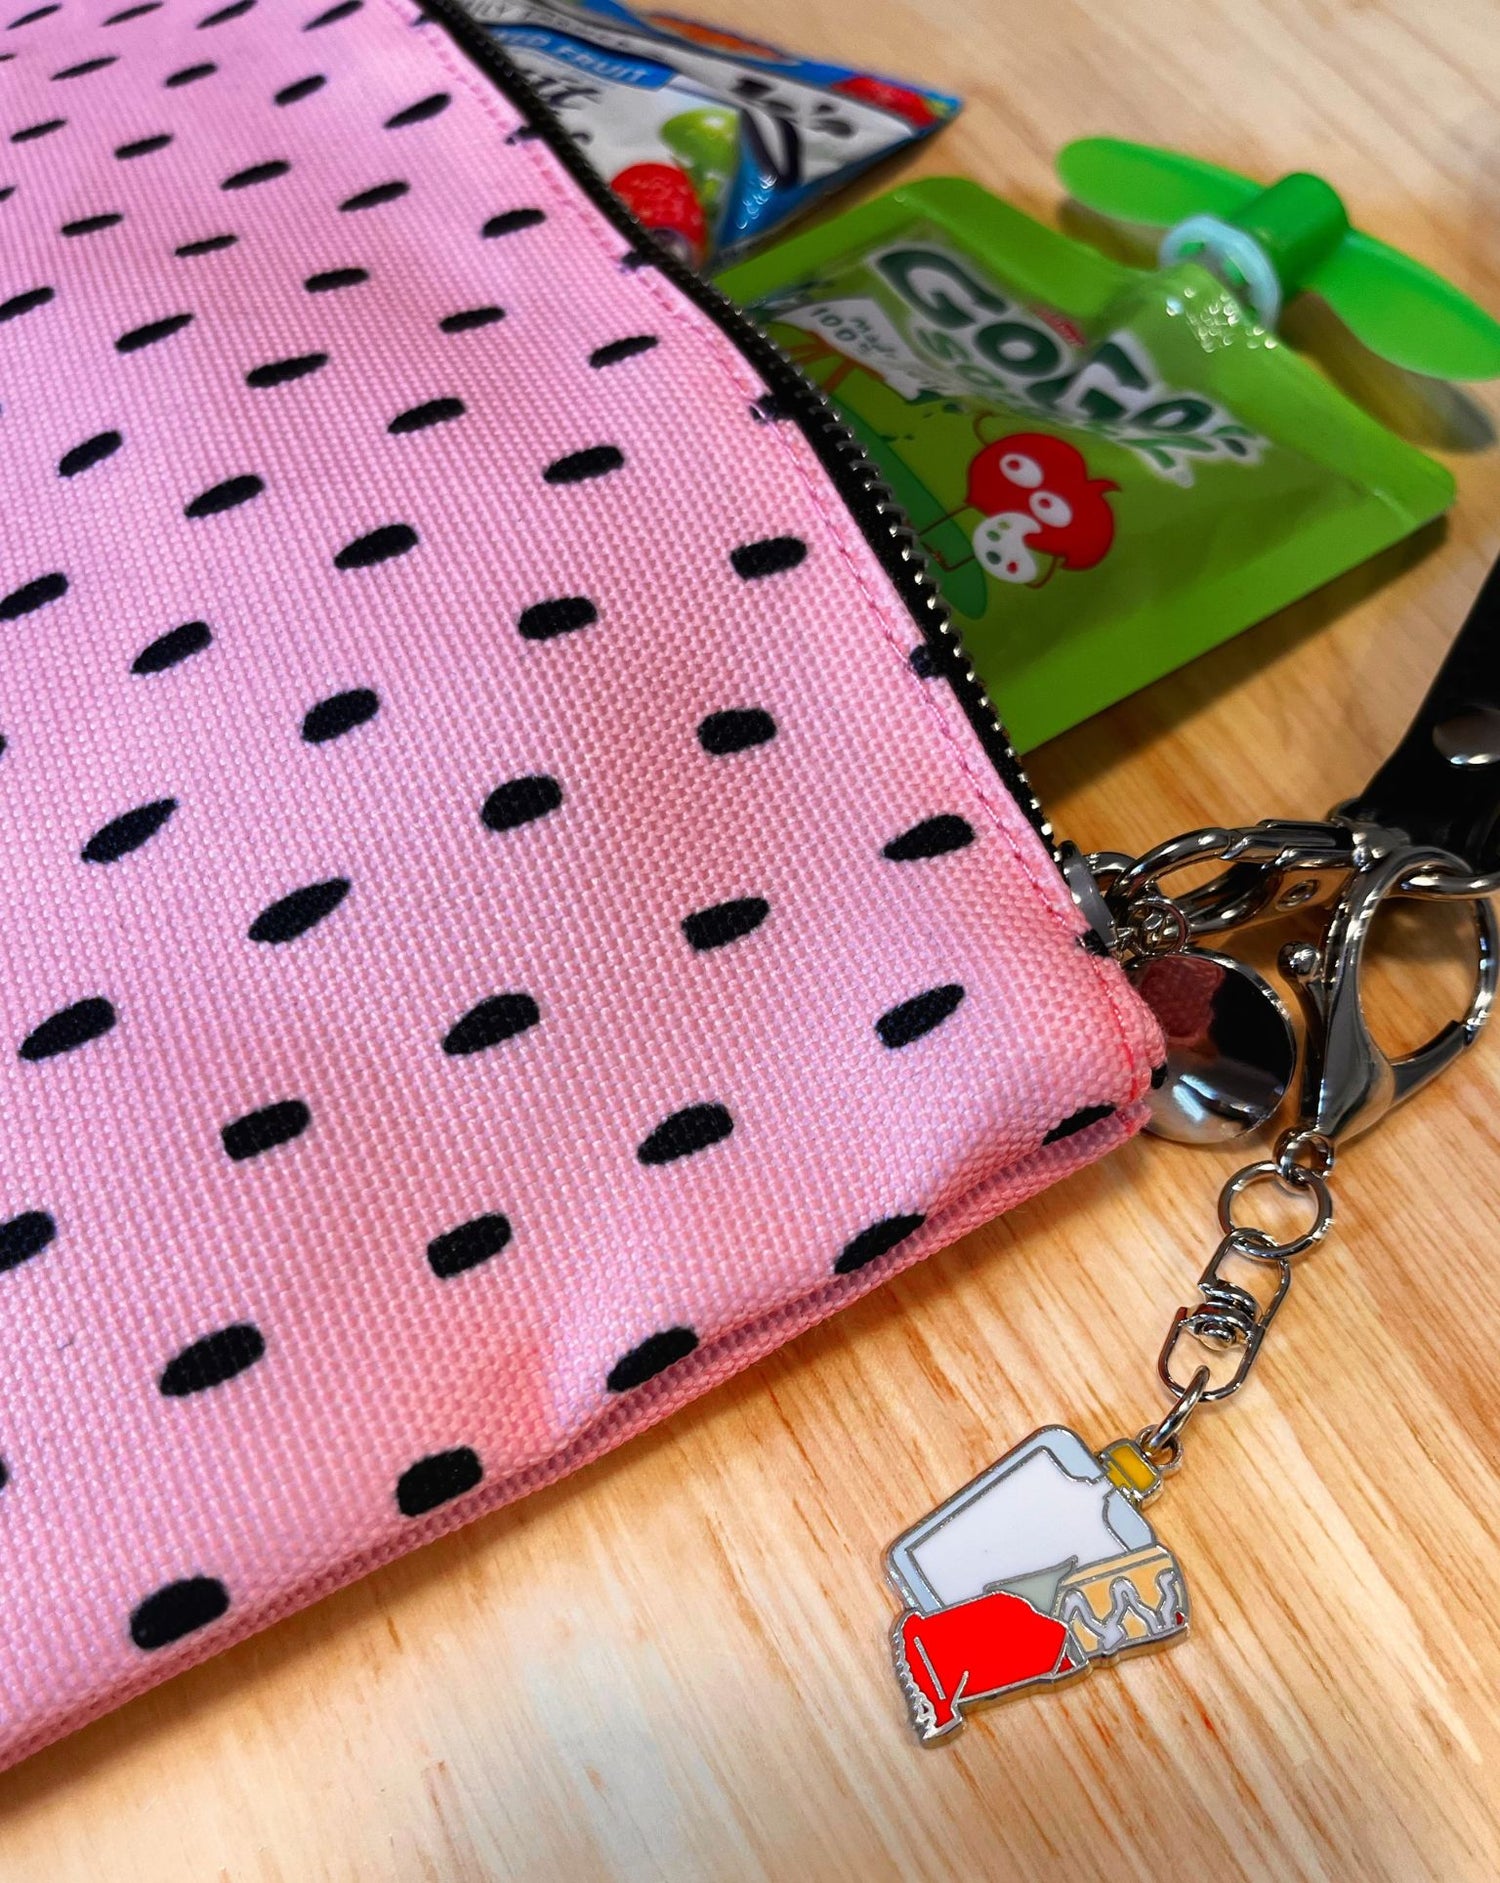 Cute bag charm of a snack pouch and snack bar